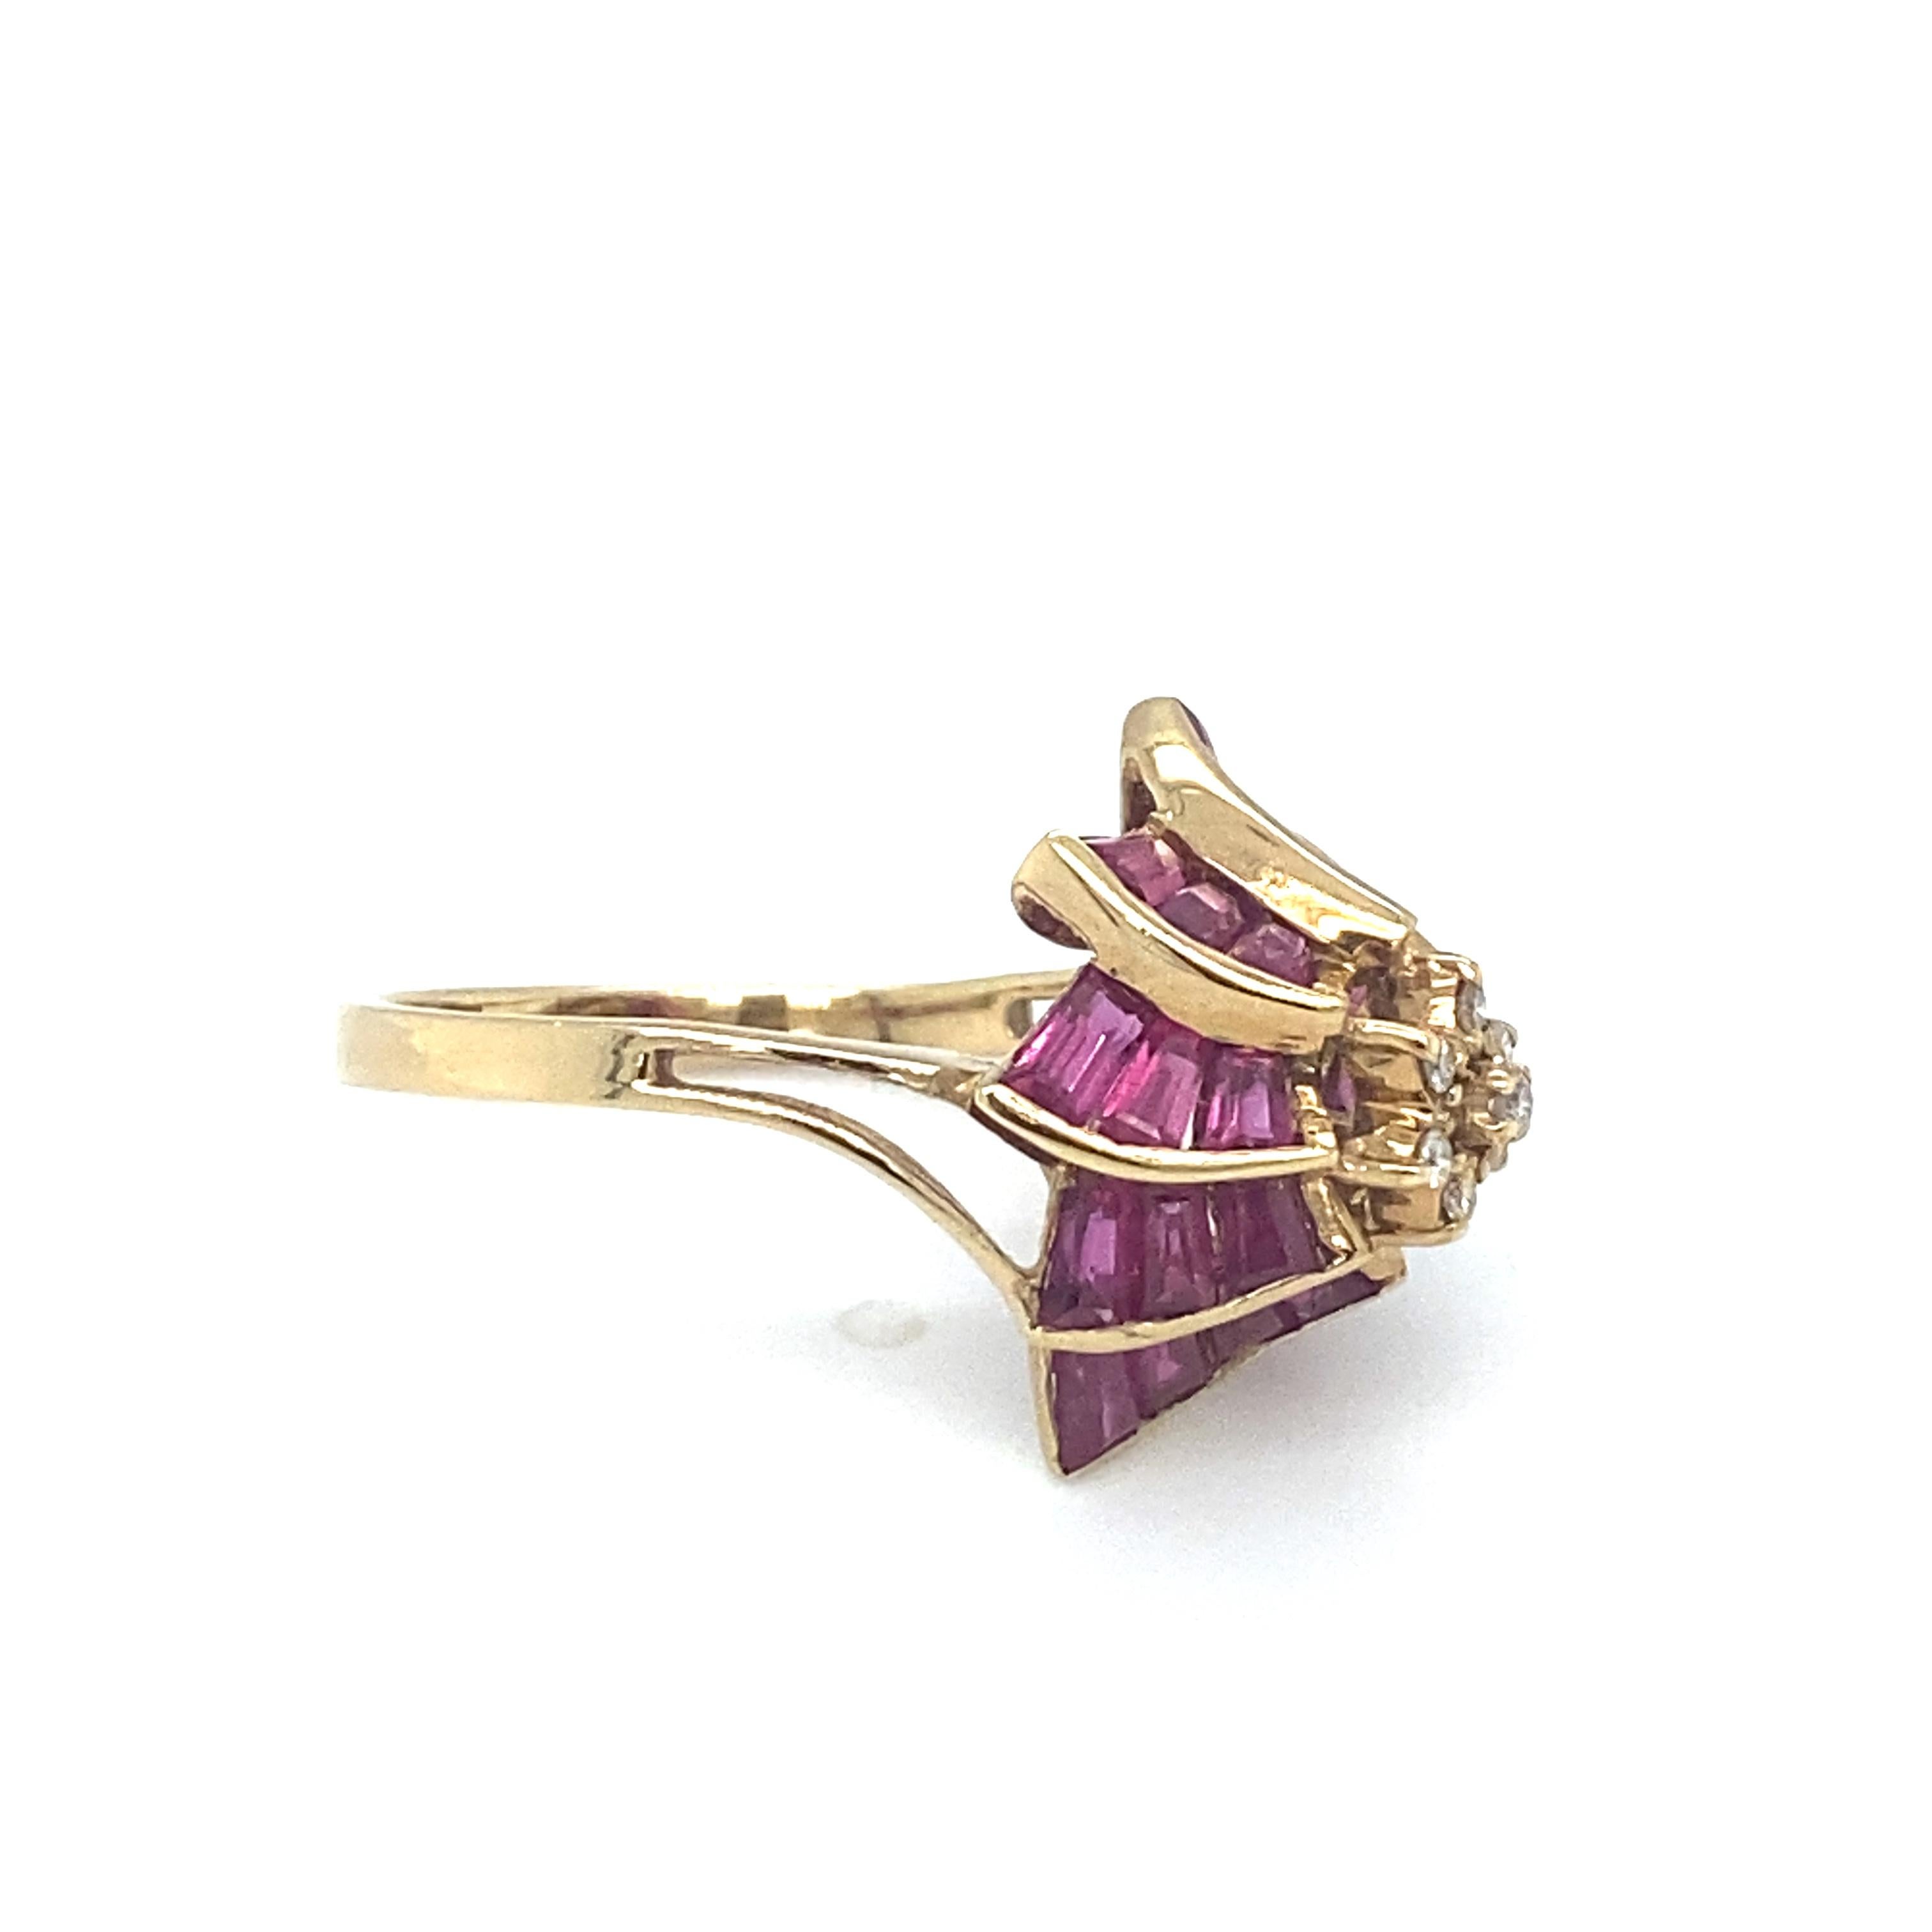 Circa 1980s Ruby and Diamond Floral Motif Ring in 14K Gold 1